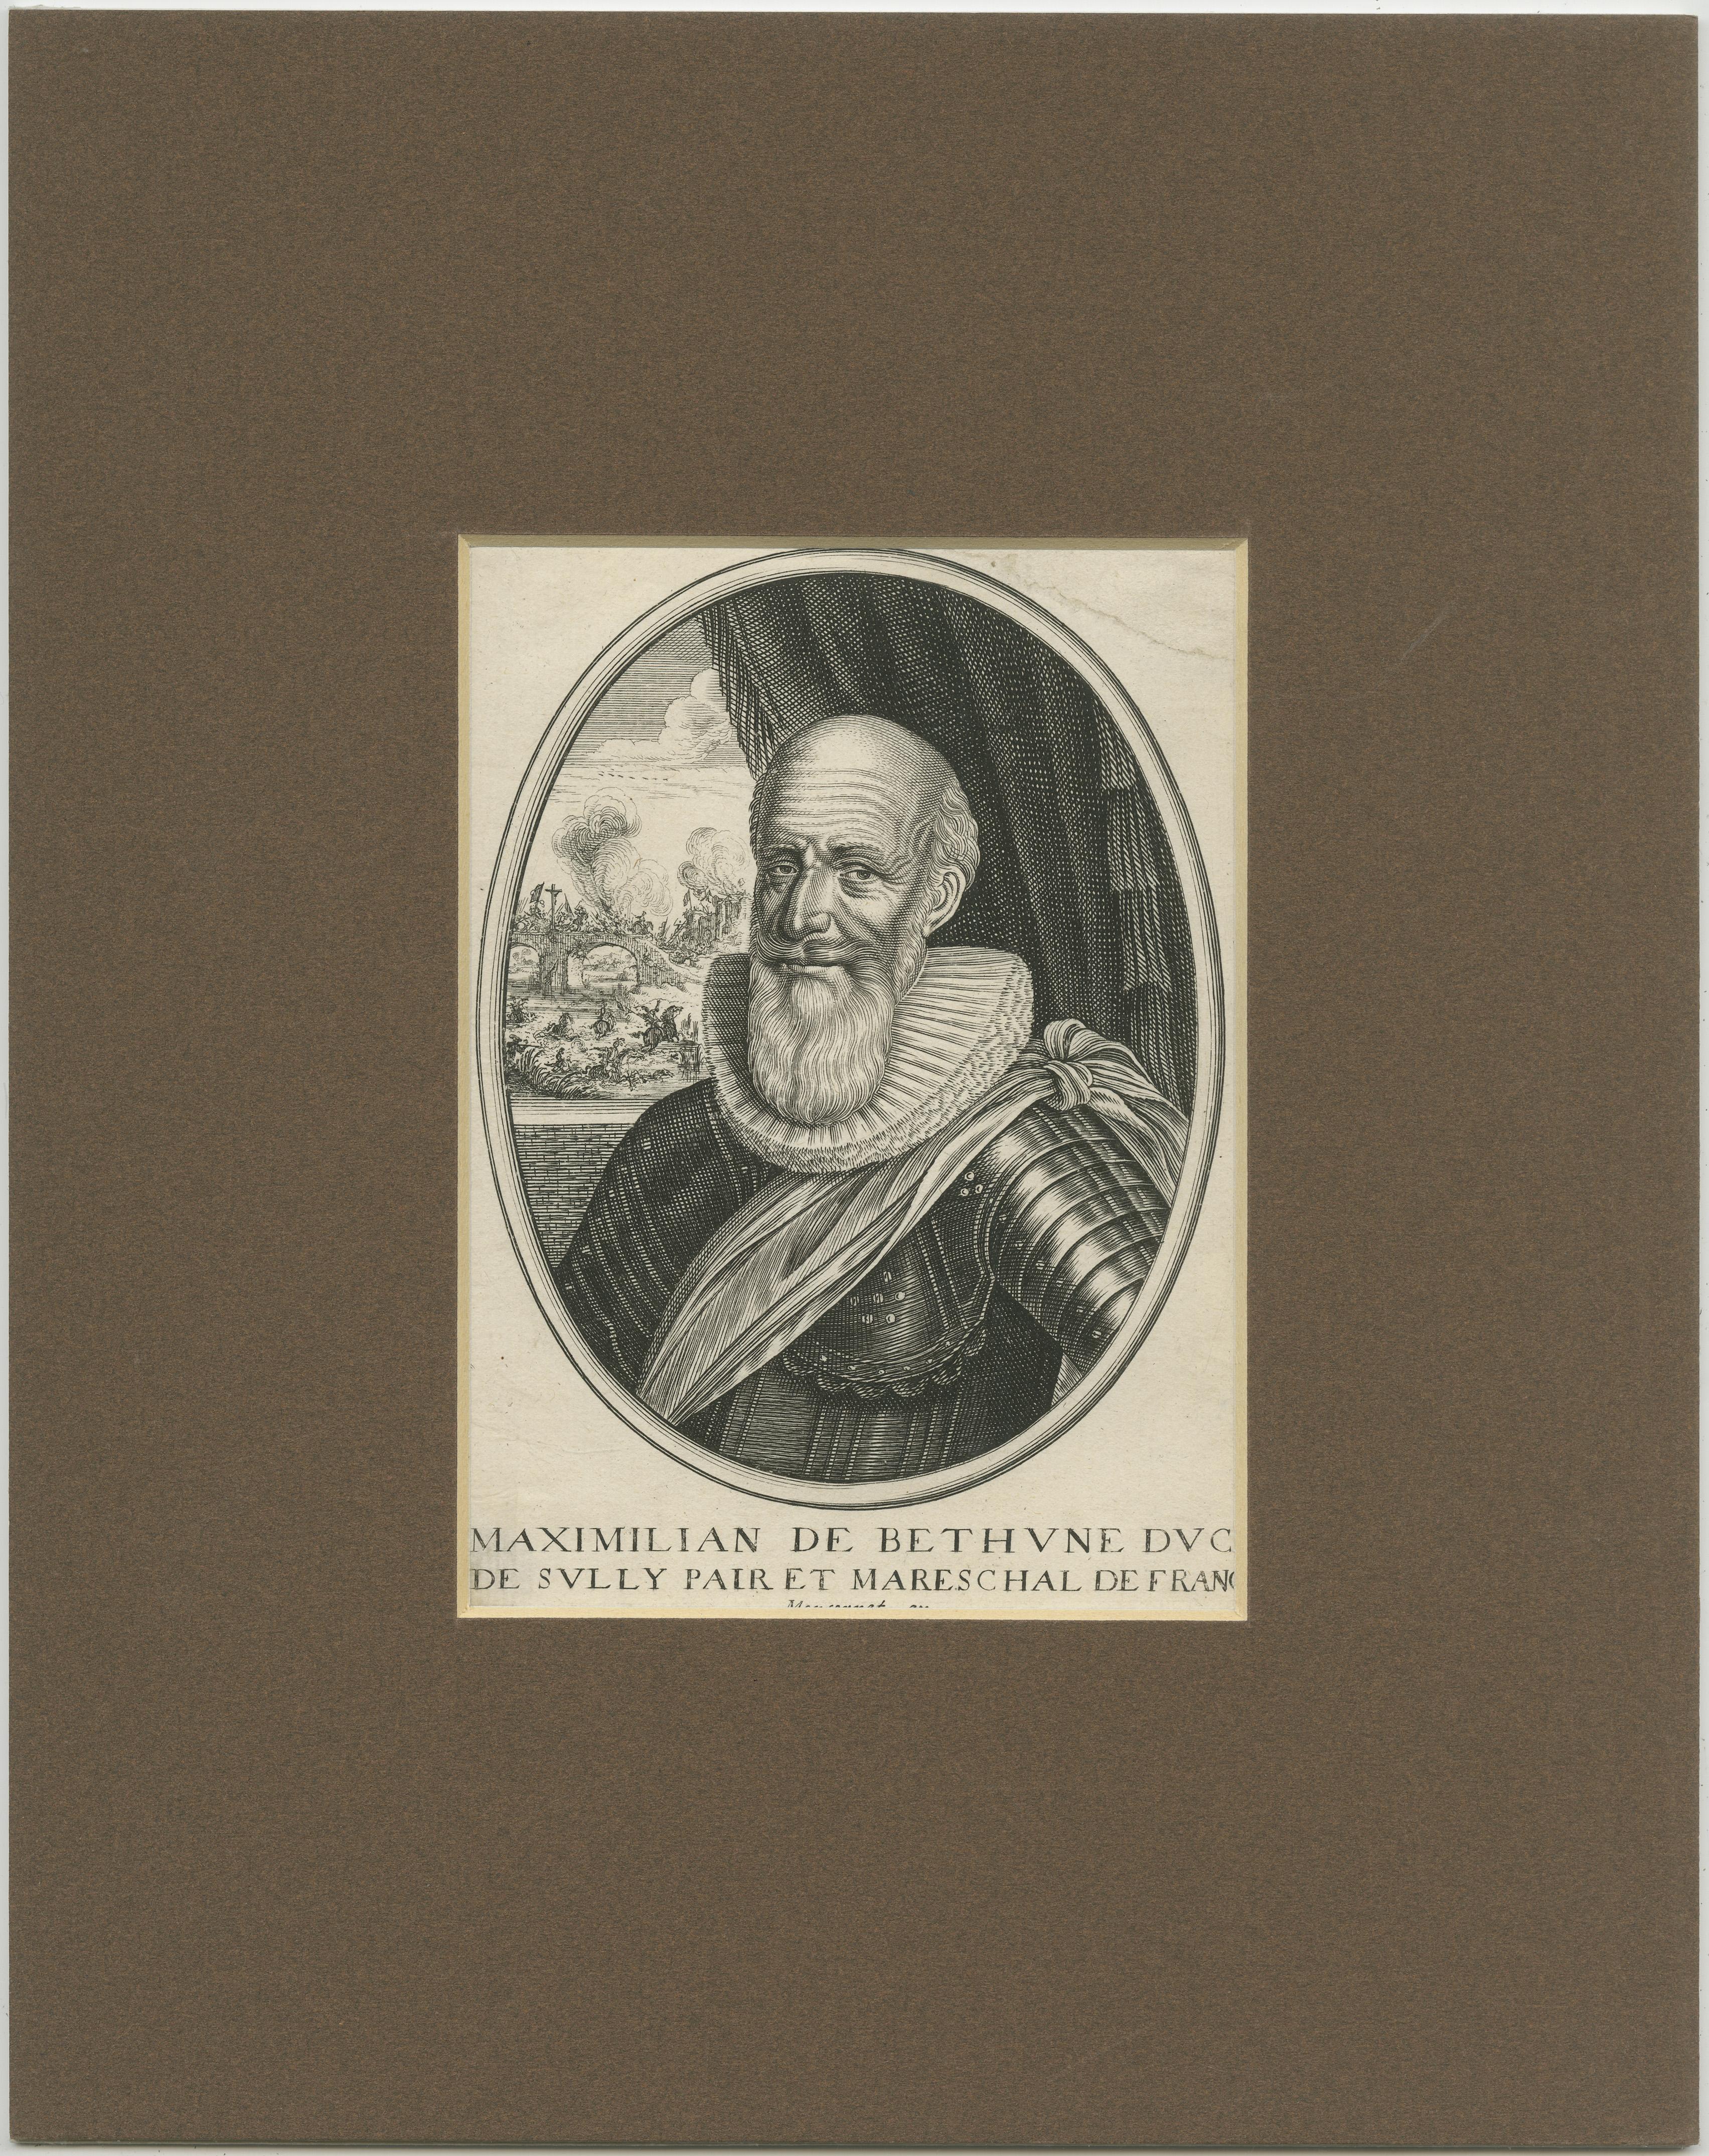 Antique print titled 'Maximilian de Bethune Duc (..)'. Portrait of Maximilien de Béthune, Duke of Sully, half-length, turned to left and looking to front, with ruff, armour and sash, and a battle on a bridge in the background; in oval.

Published